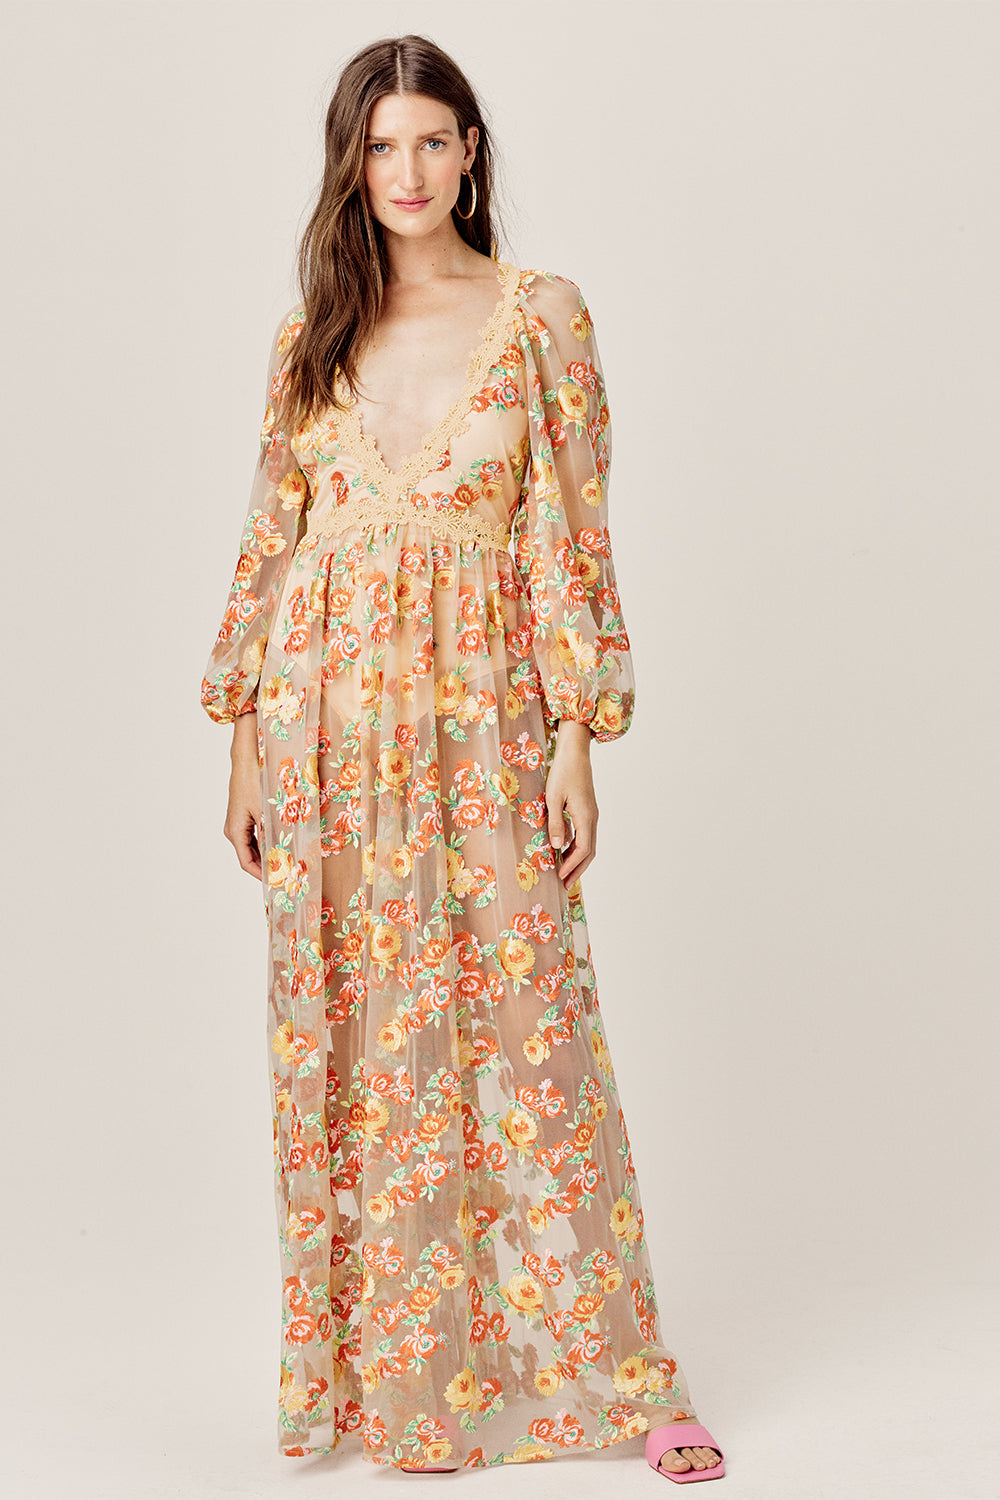 wildflowers embroidered maxi dress